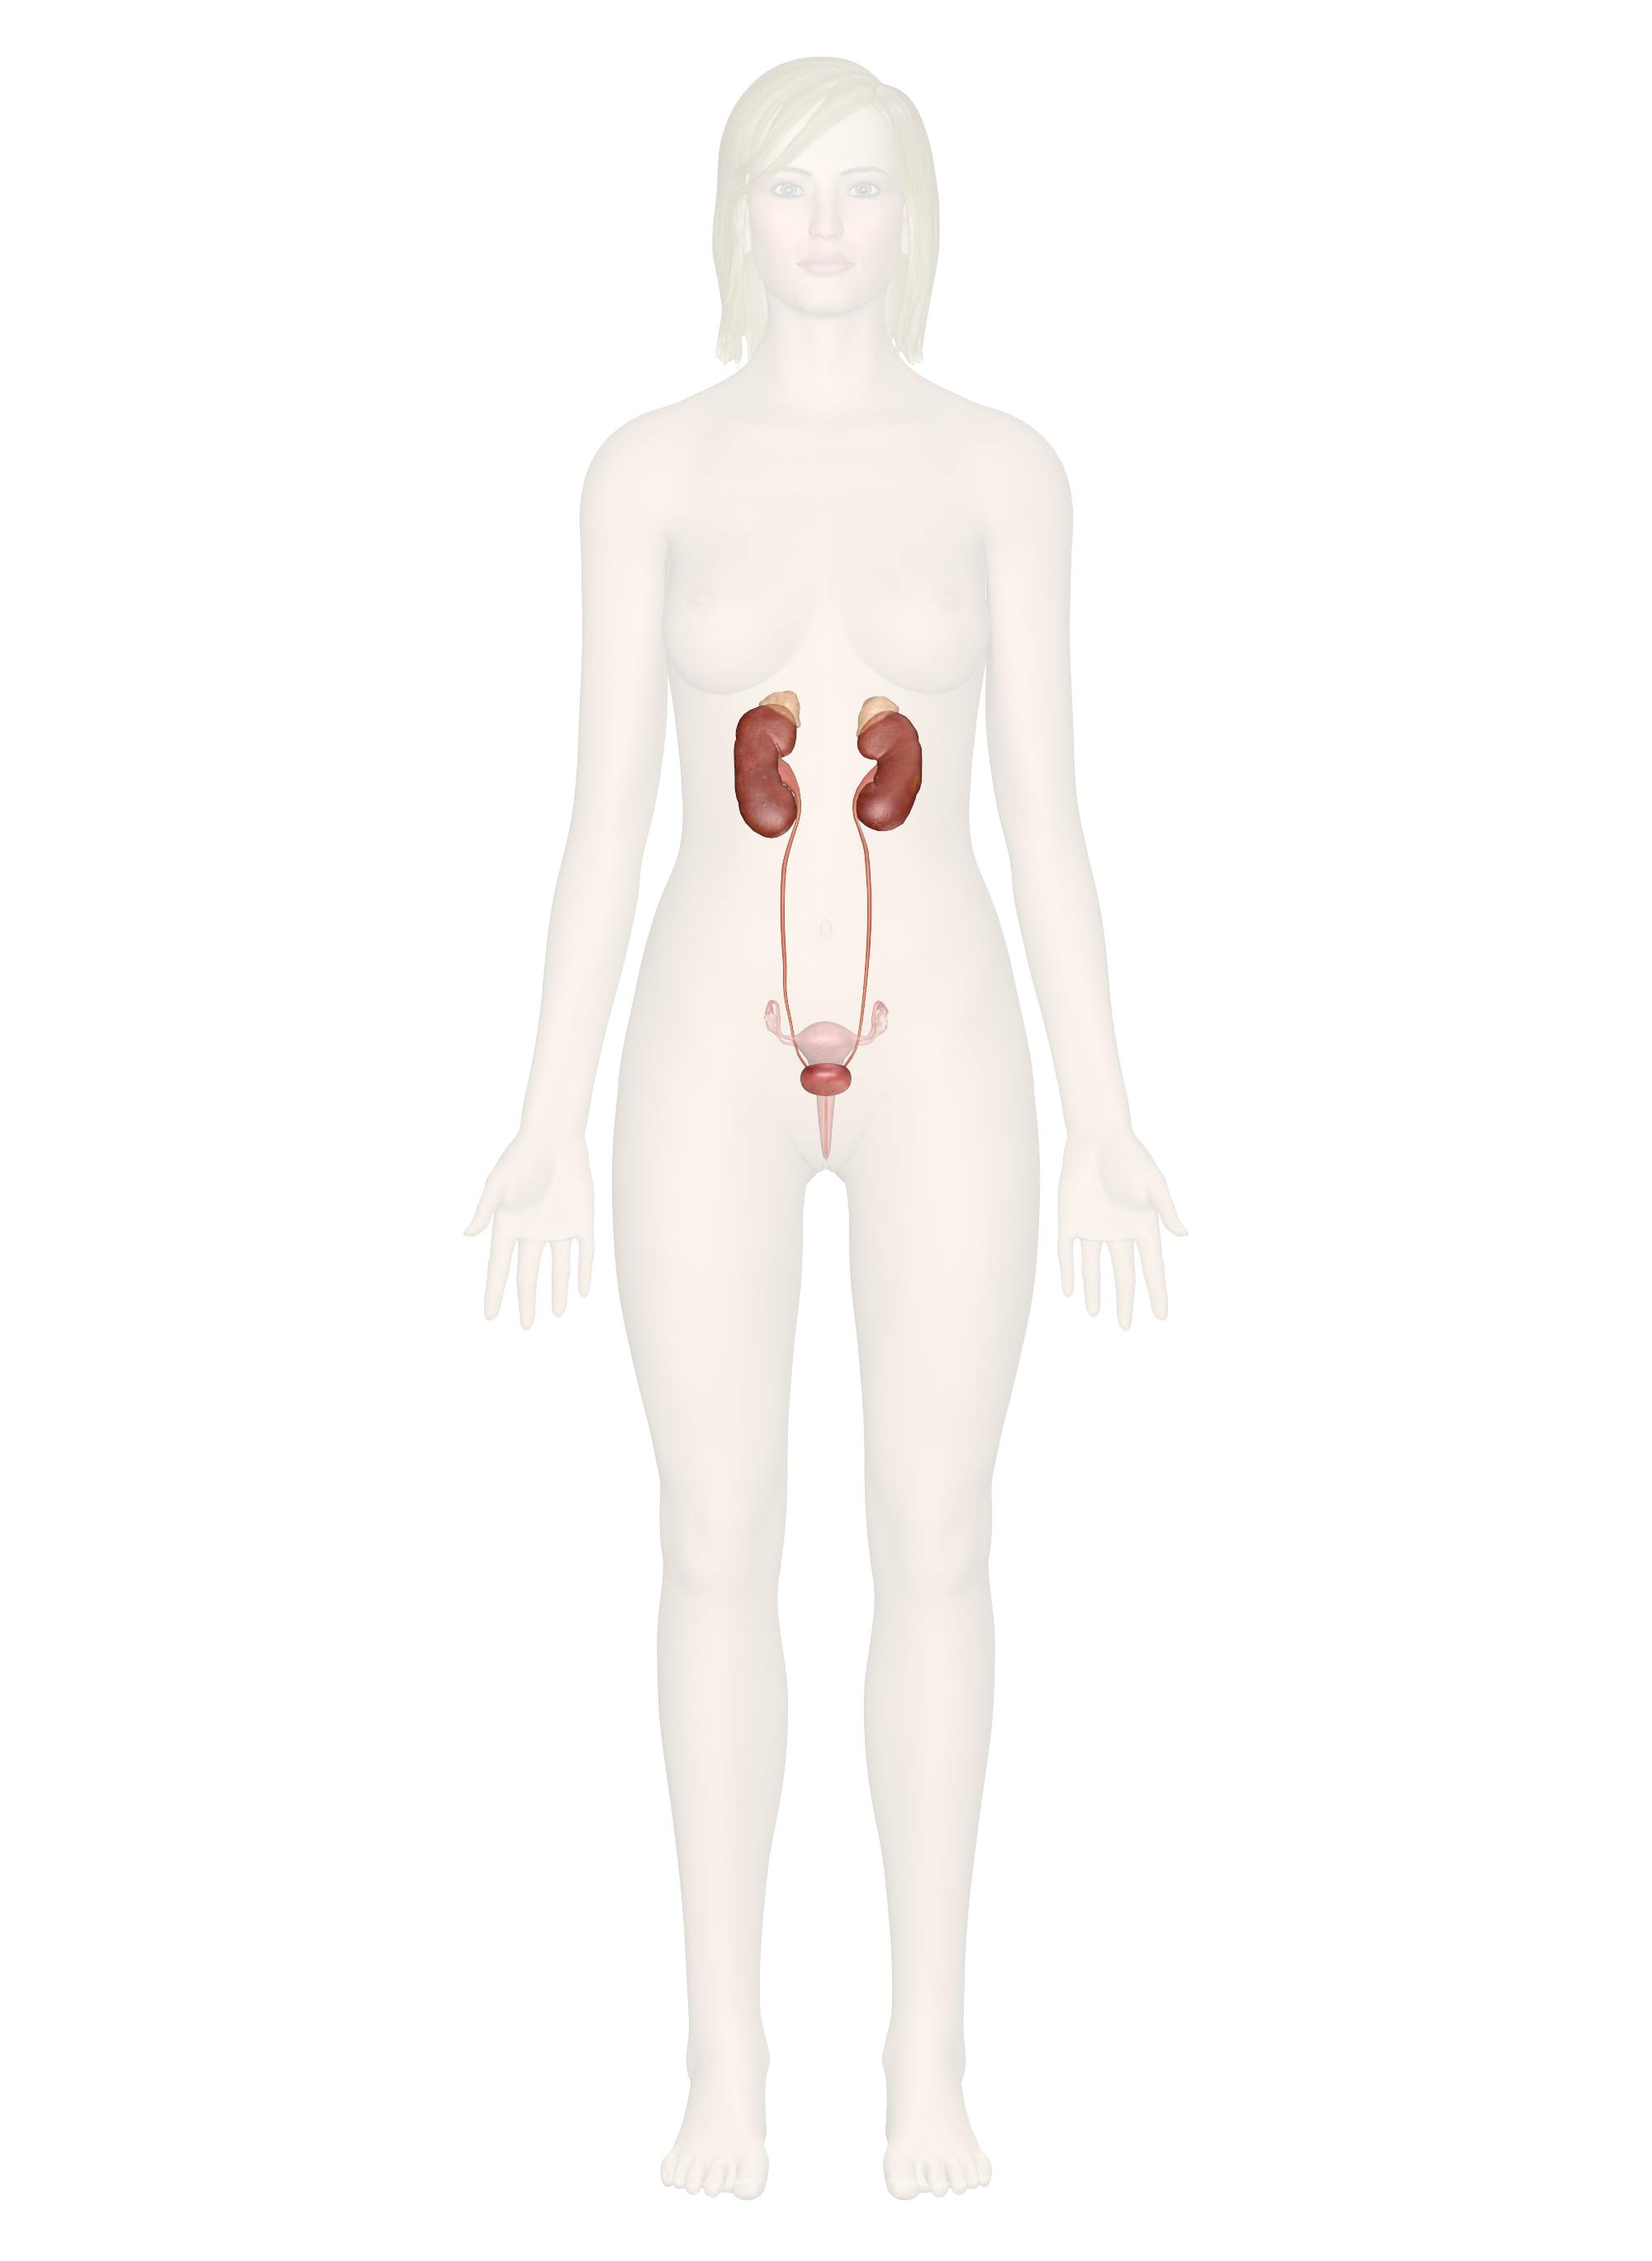 urinary system organs and their functions